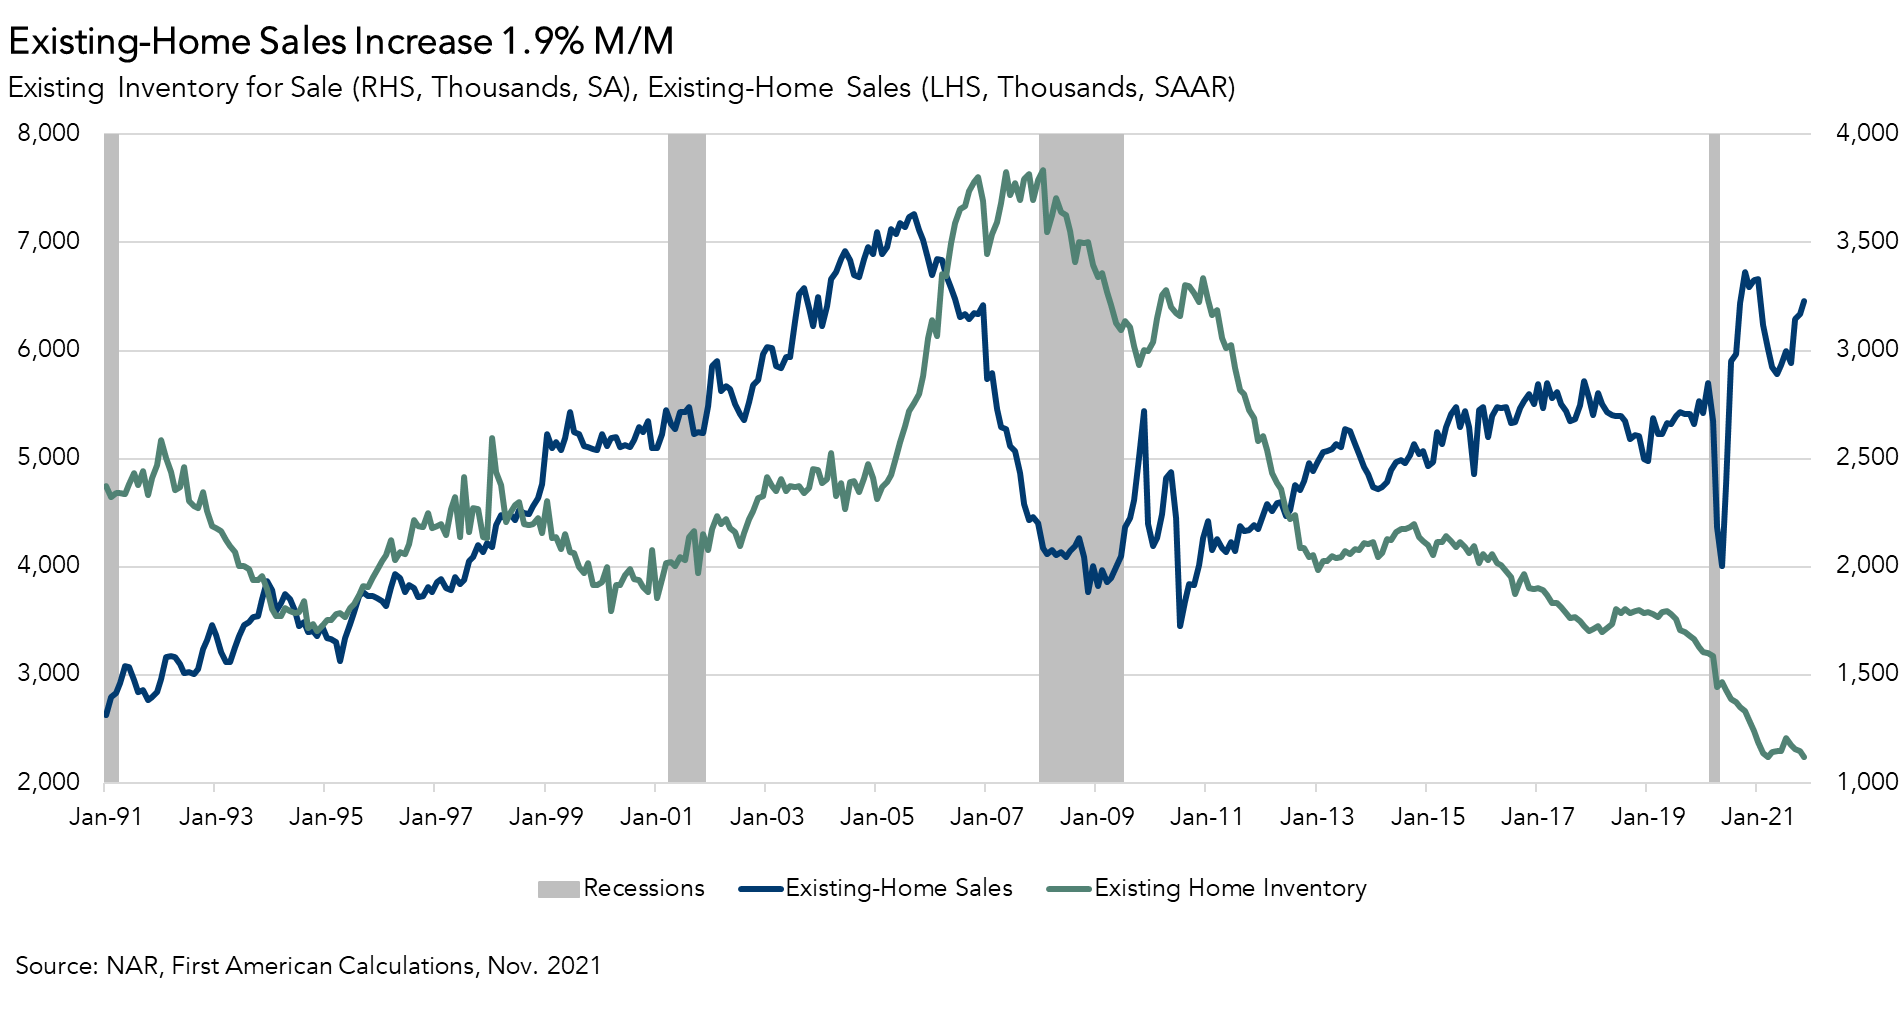 U.S. supply of existing homes and existing-home sales from 1991 to 2021 - 2022 housing market forecast